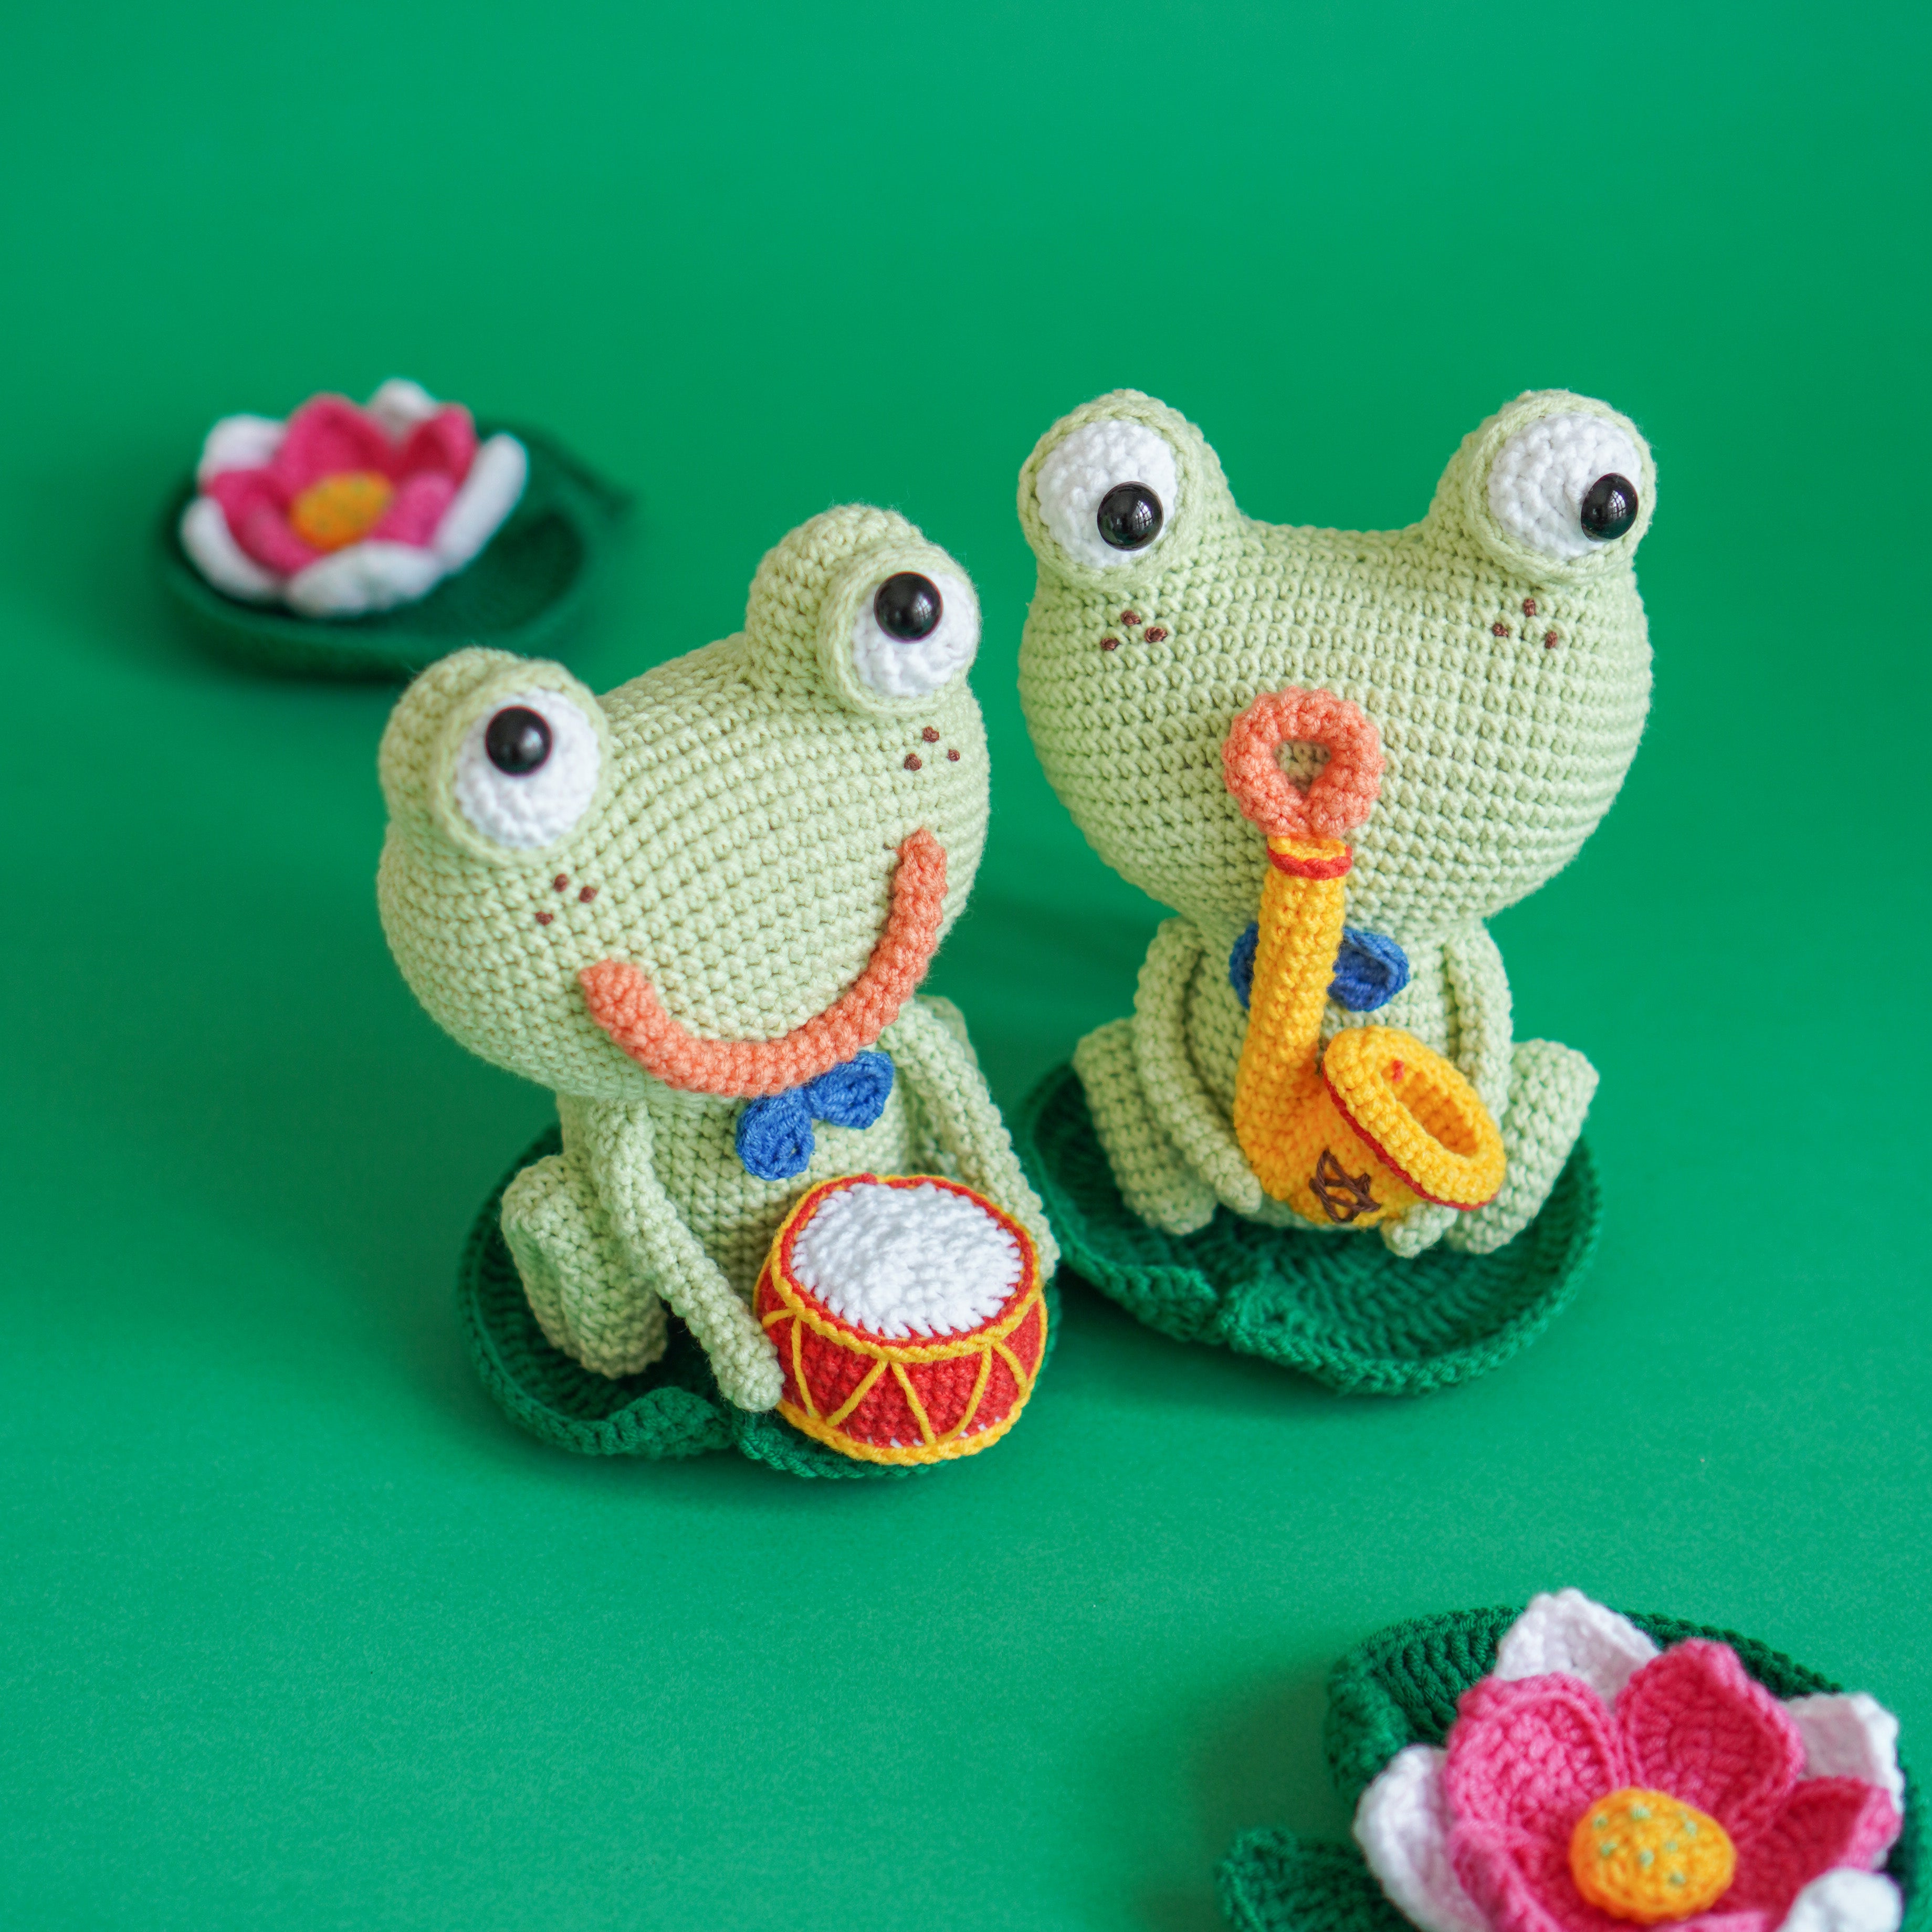 Dragonfly & 3 Frogs Crochet Pattern by Aquariwool Crochet (Crochet Doll Pattern/Amigurumi Pattern for Baby gift)